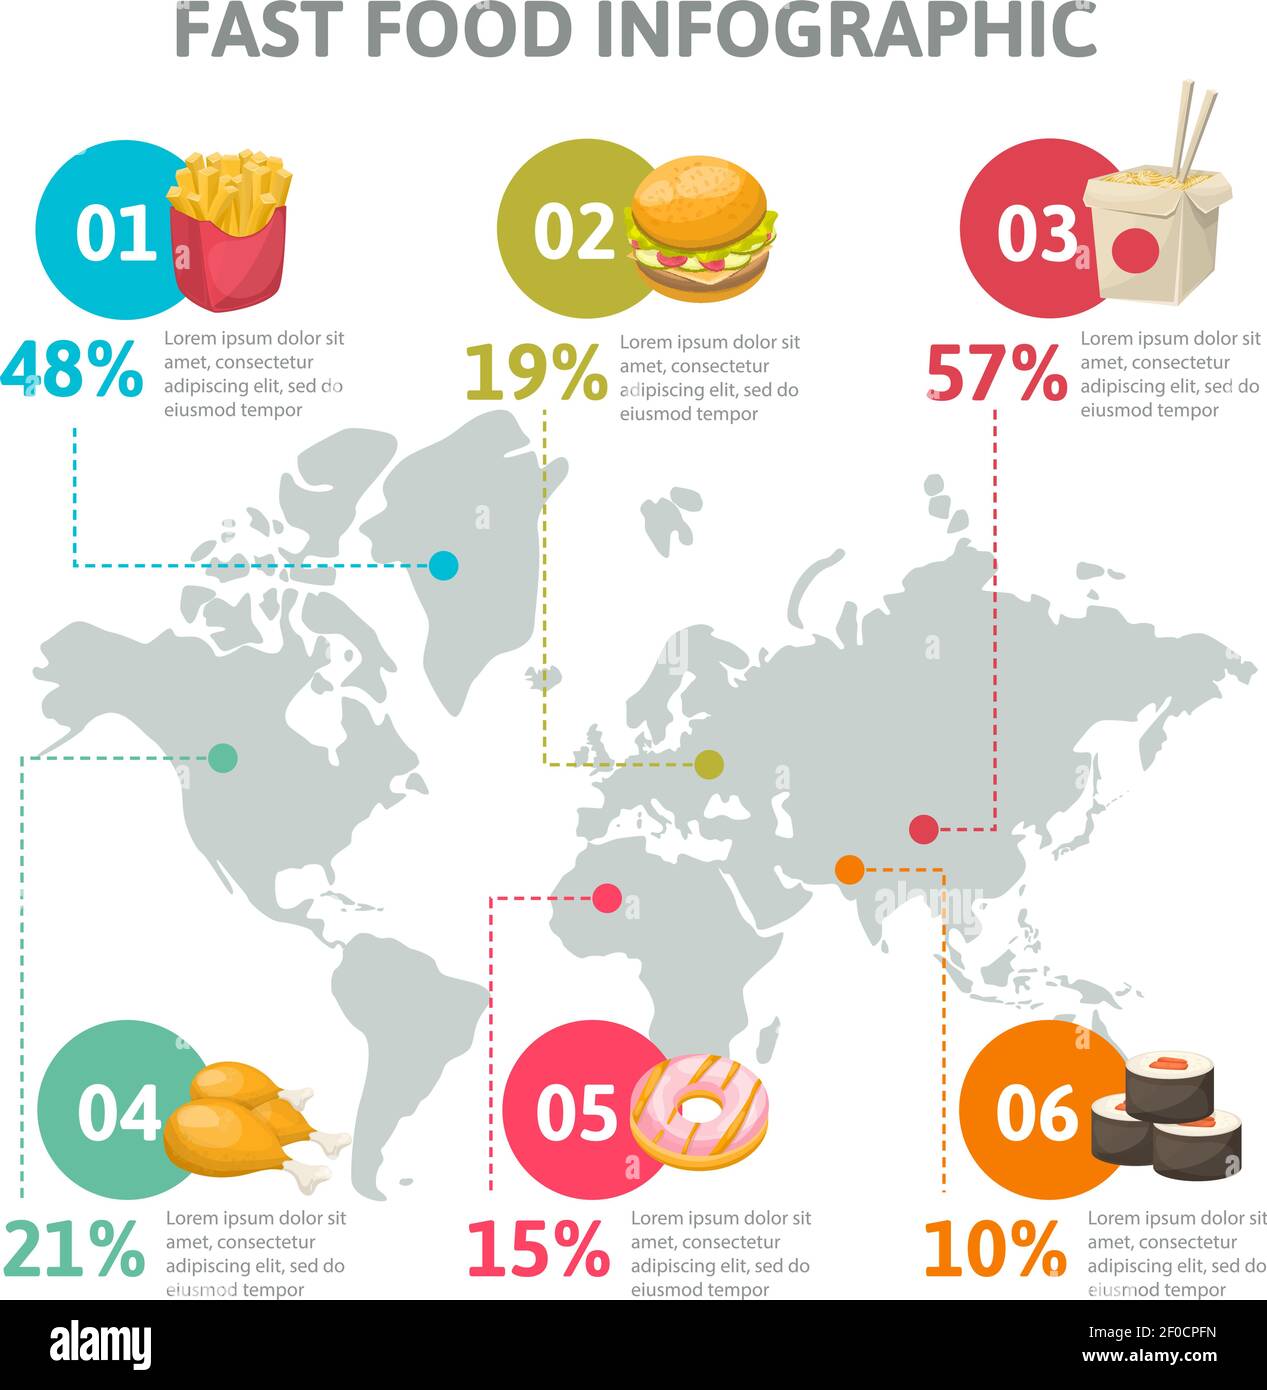 infographic food consumption